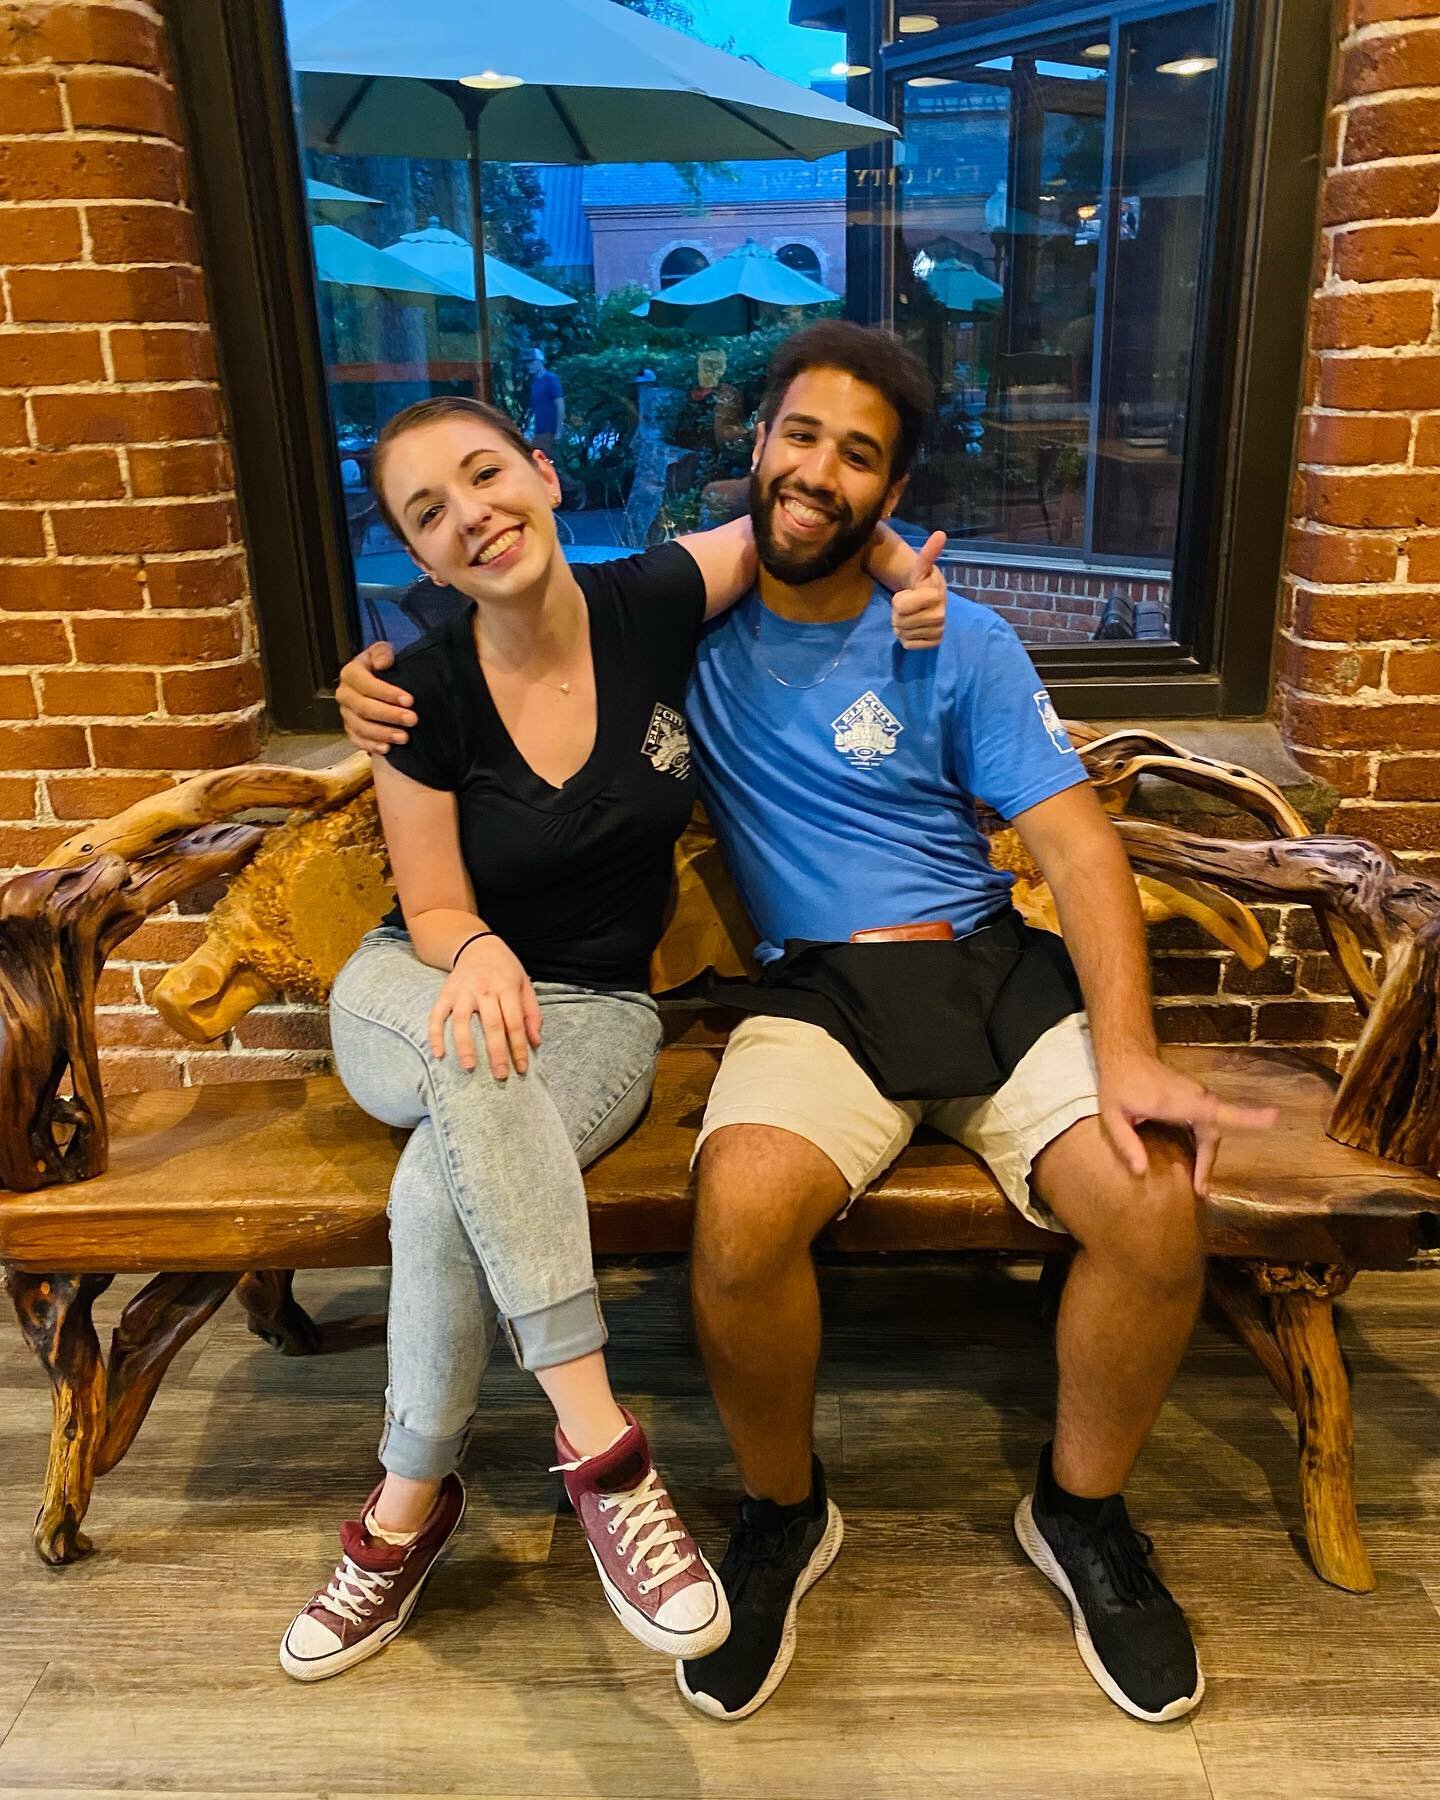 We&rsquo;re wishing the best of luck to two of our wonderful servers! Kim is off to pursue her EMT career and Damien will be starting an internship in Texas. We&rsquo;ll miss our friends but we&rsquo;re so excited for them 🍻 cheers to the future!